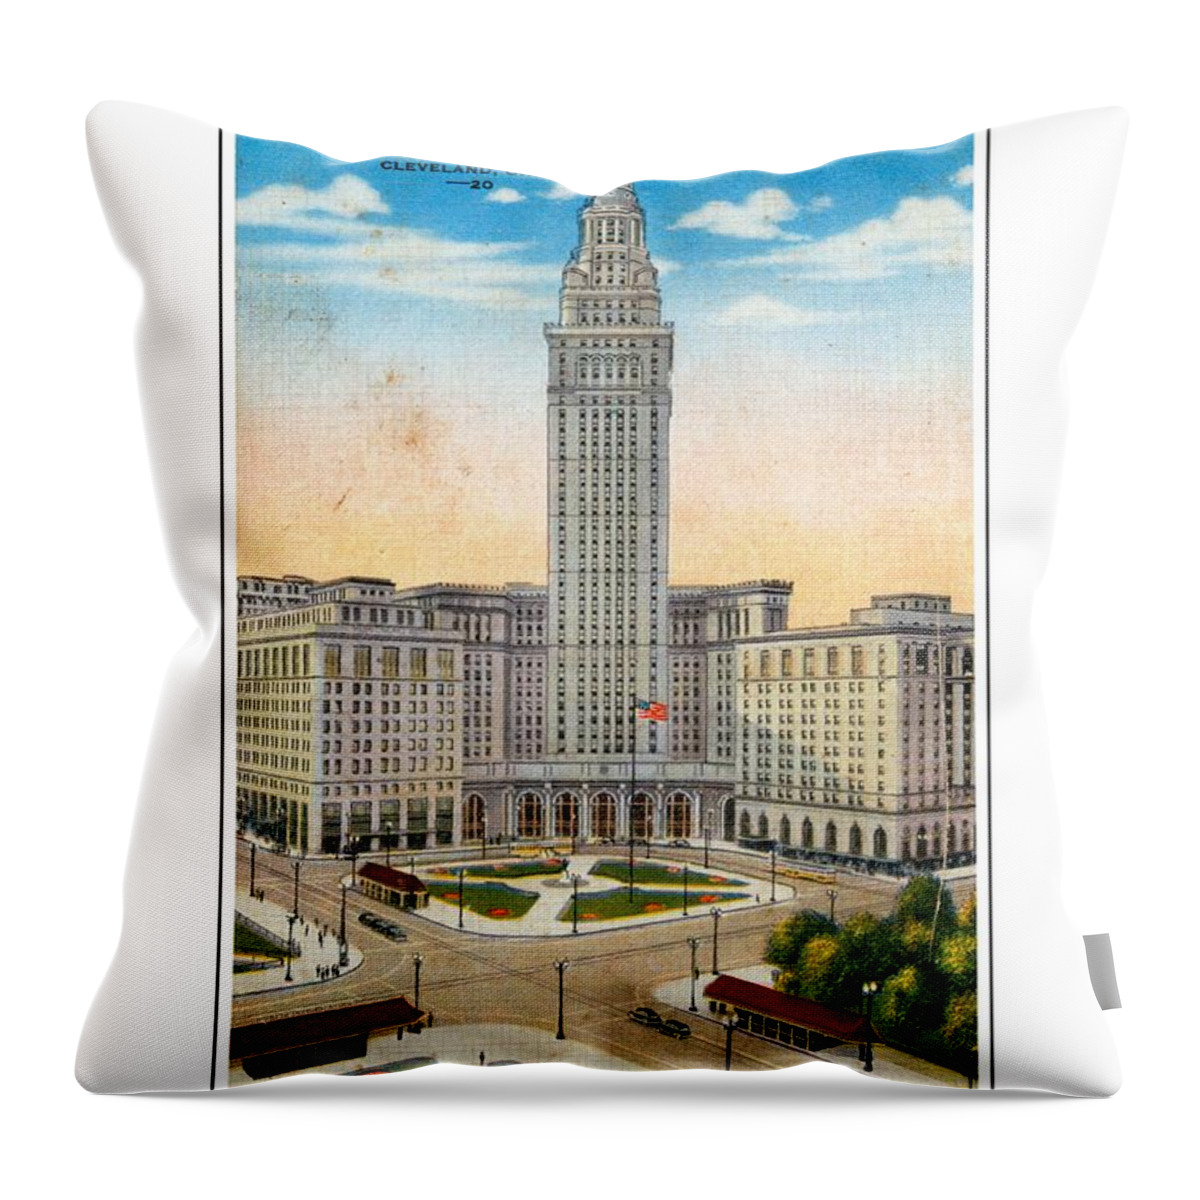 Terminal Throw Pillow featuring the digital art 1940s Terminal Tower Cleveland Ohio by Audreen Gieger